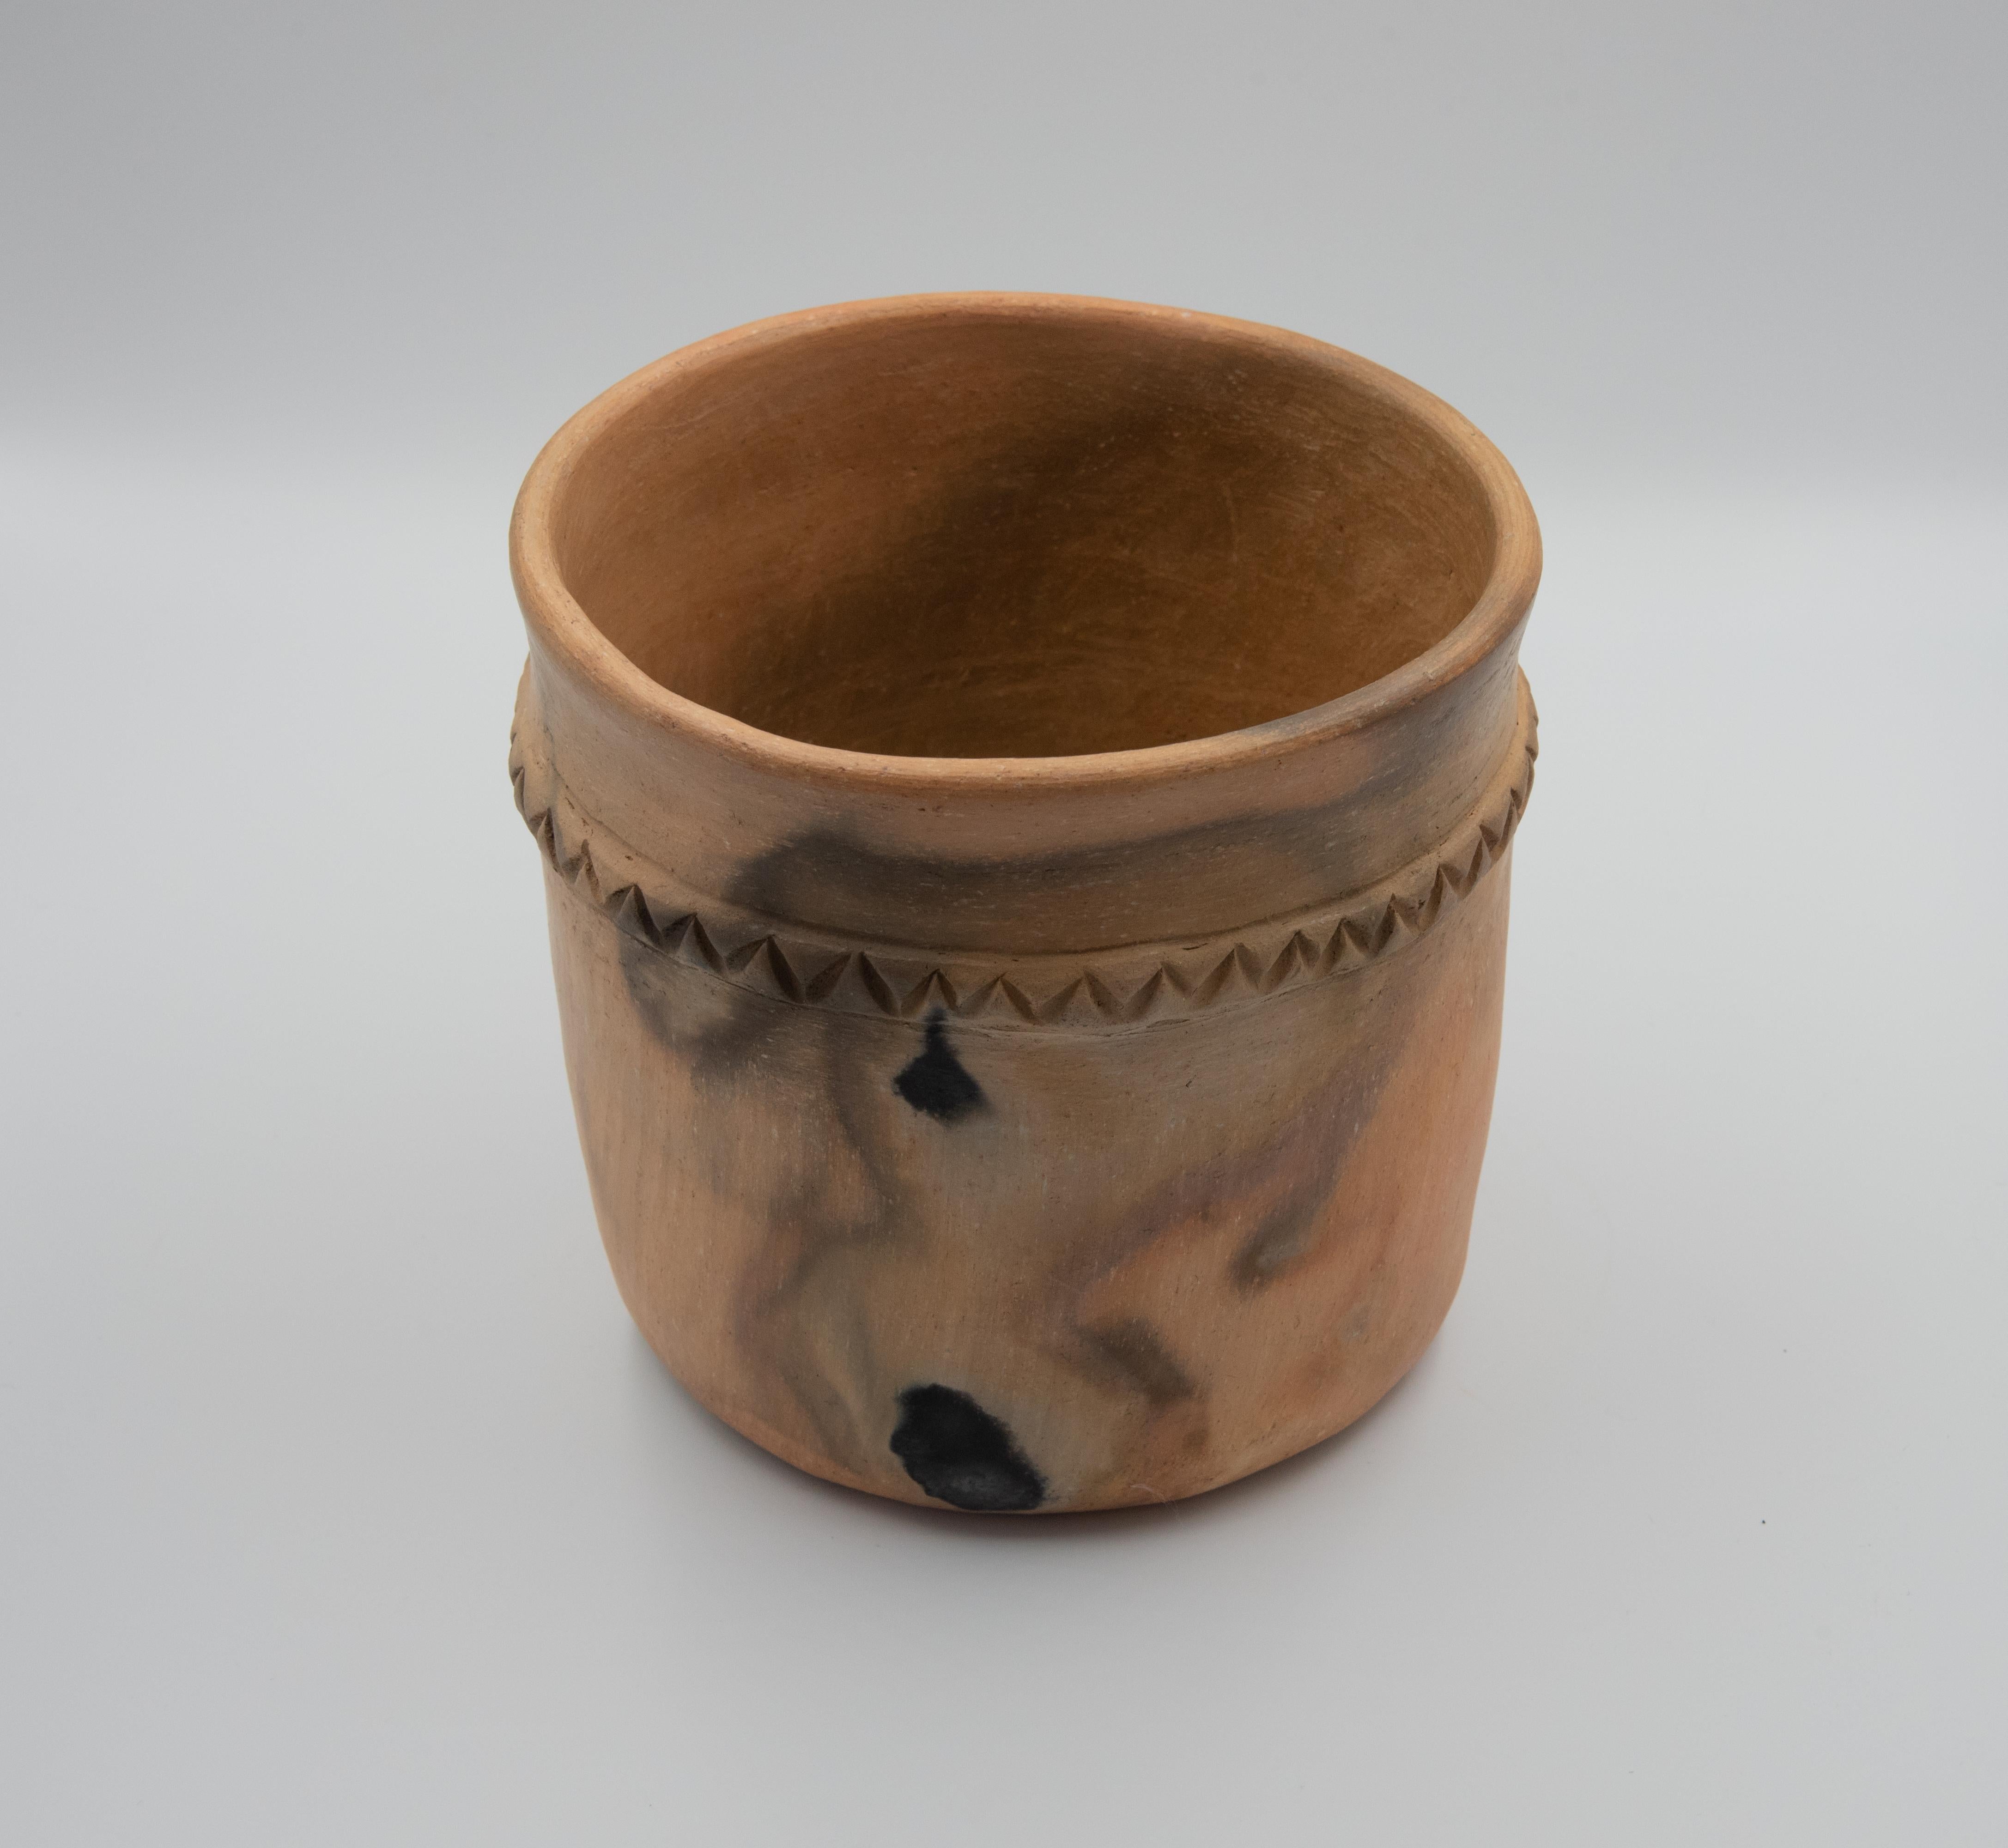 Hand-Crafted Mexican Rustic Natural Clay Folk Art Handmade Ceramic Pot Terracotta For Sale